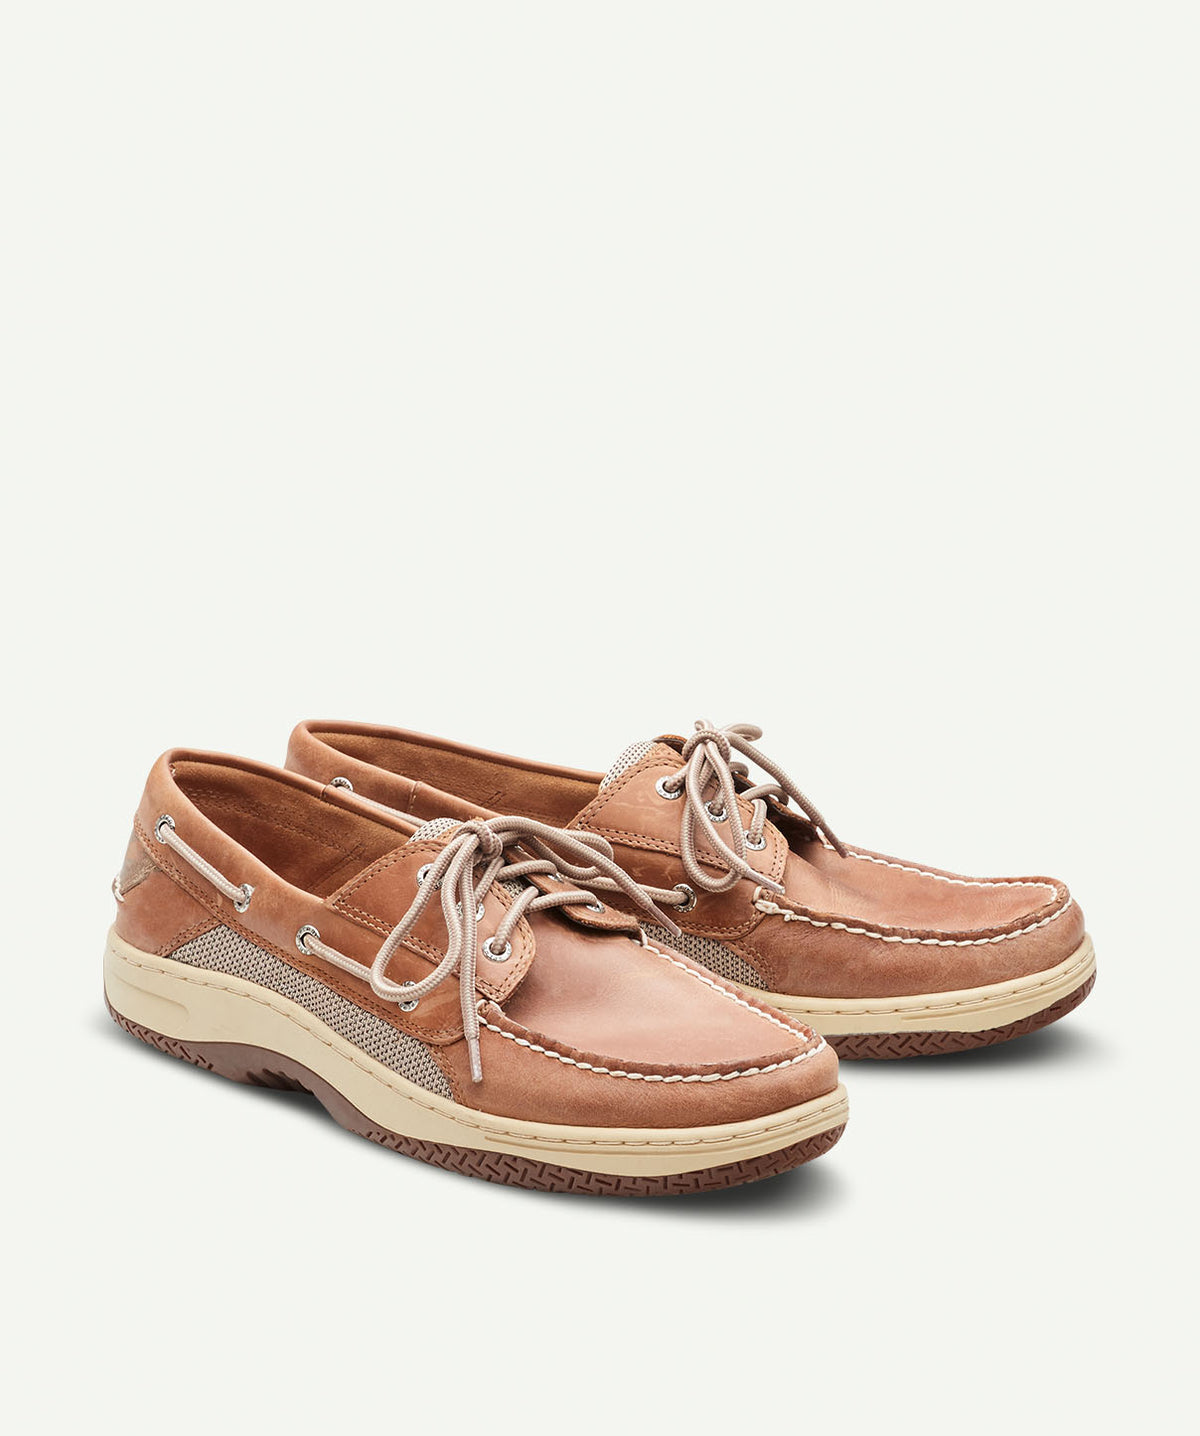 sperry boat shoes near me